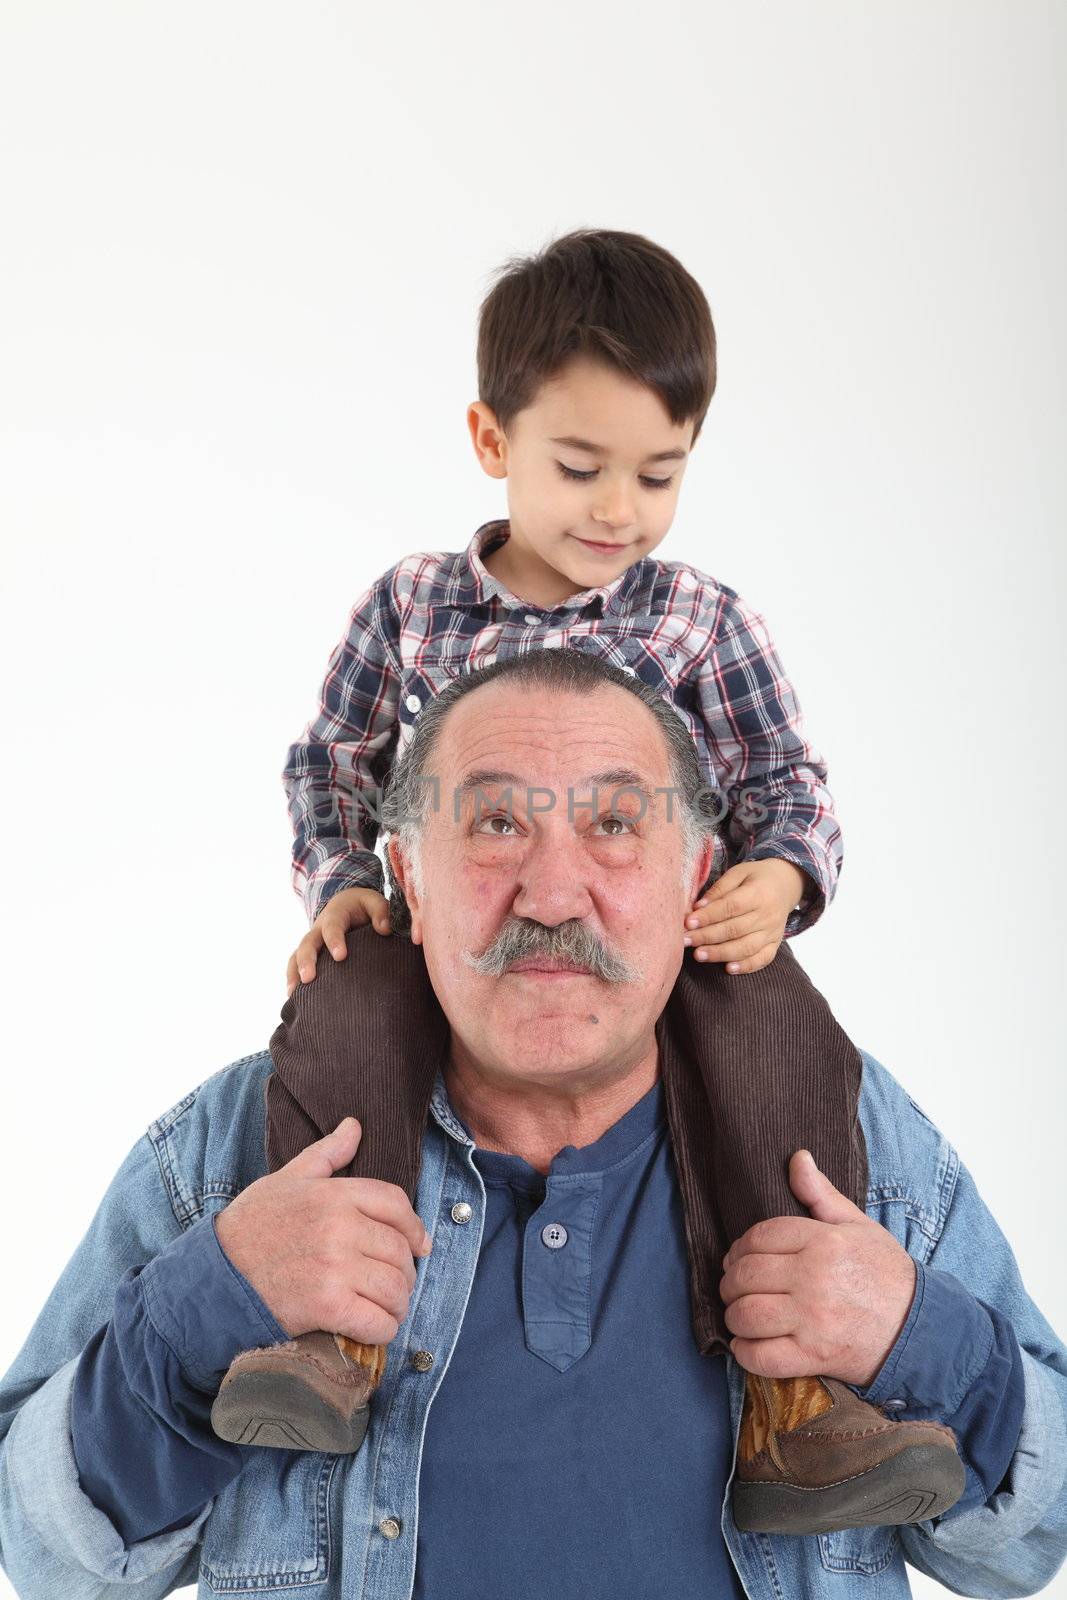 Child and grandfather stay together on white background